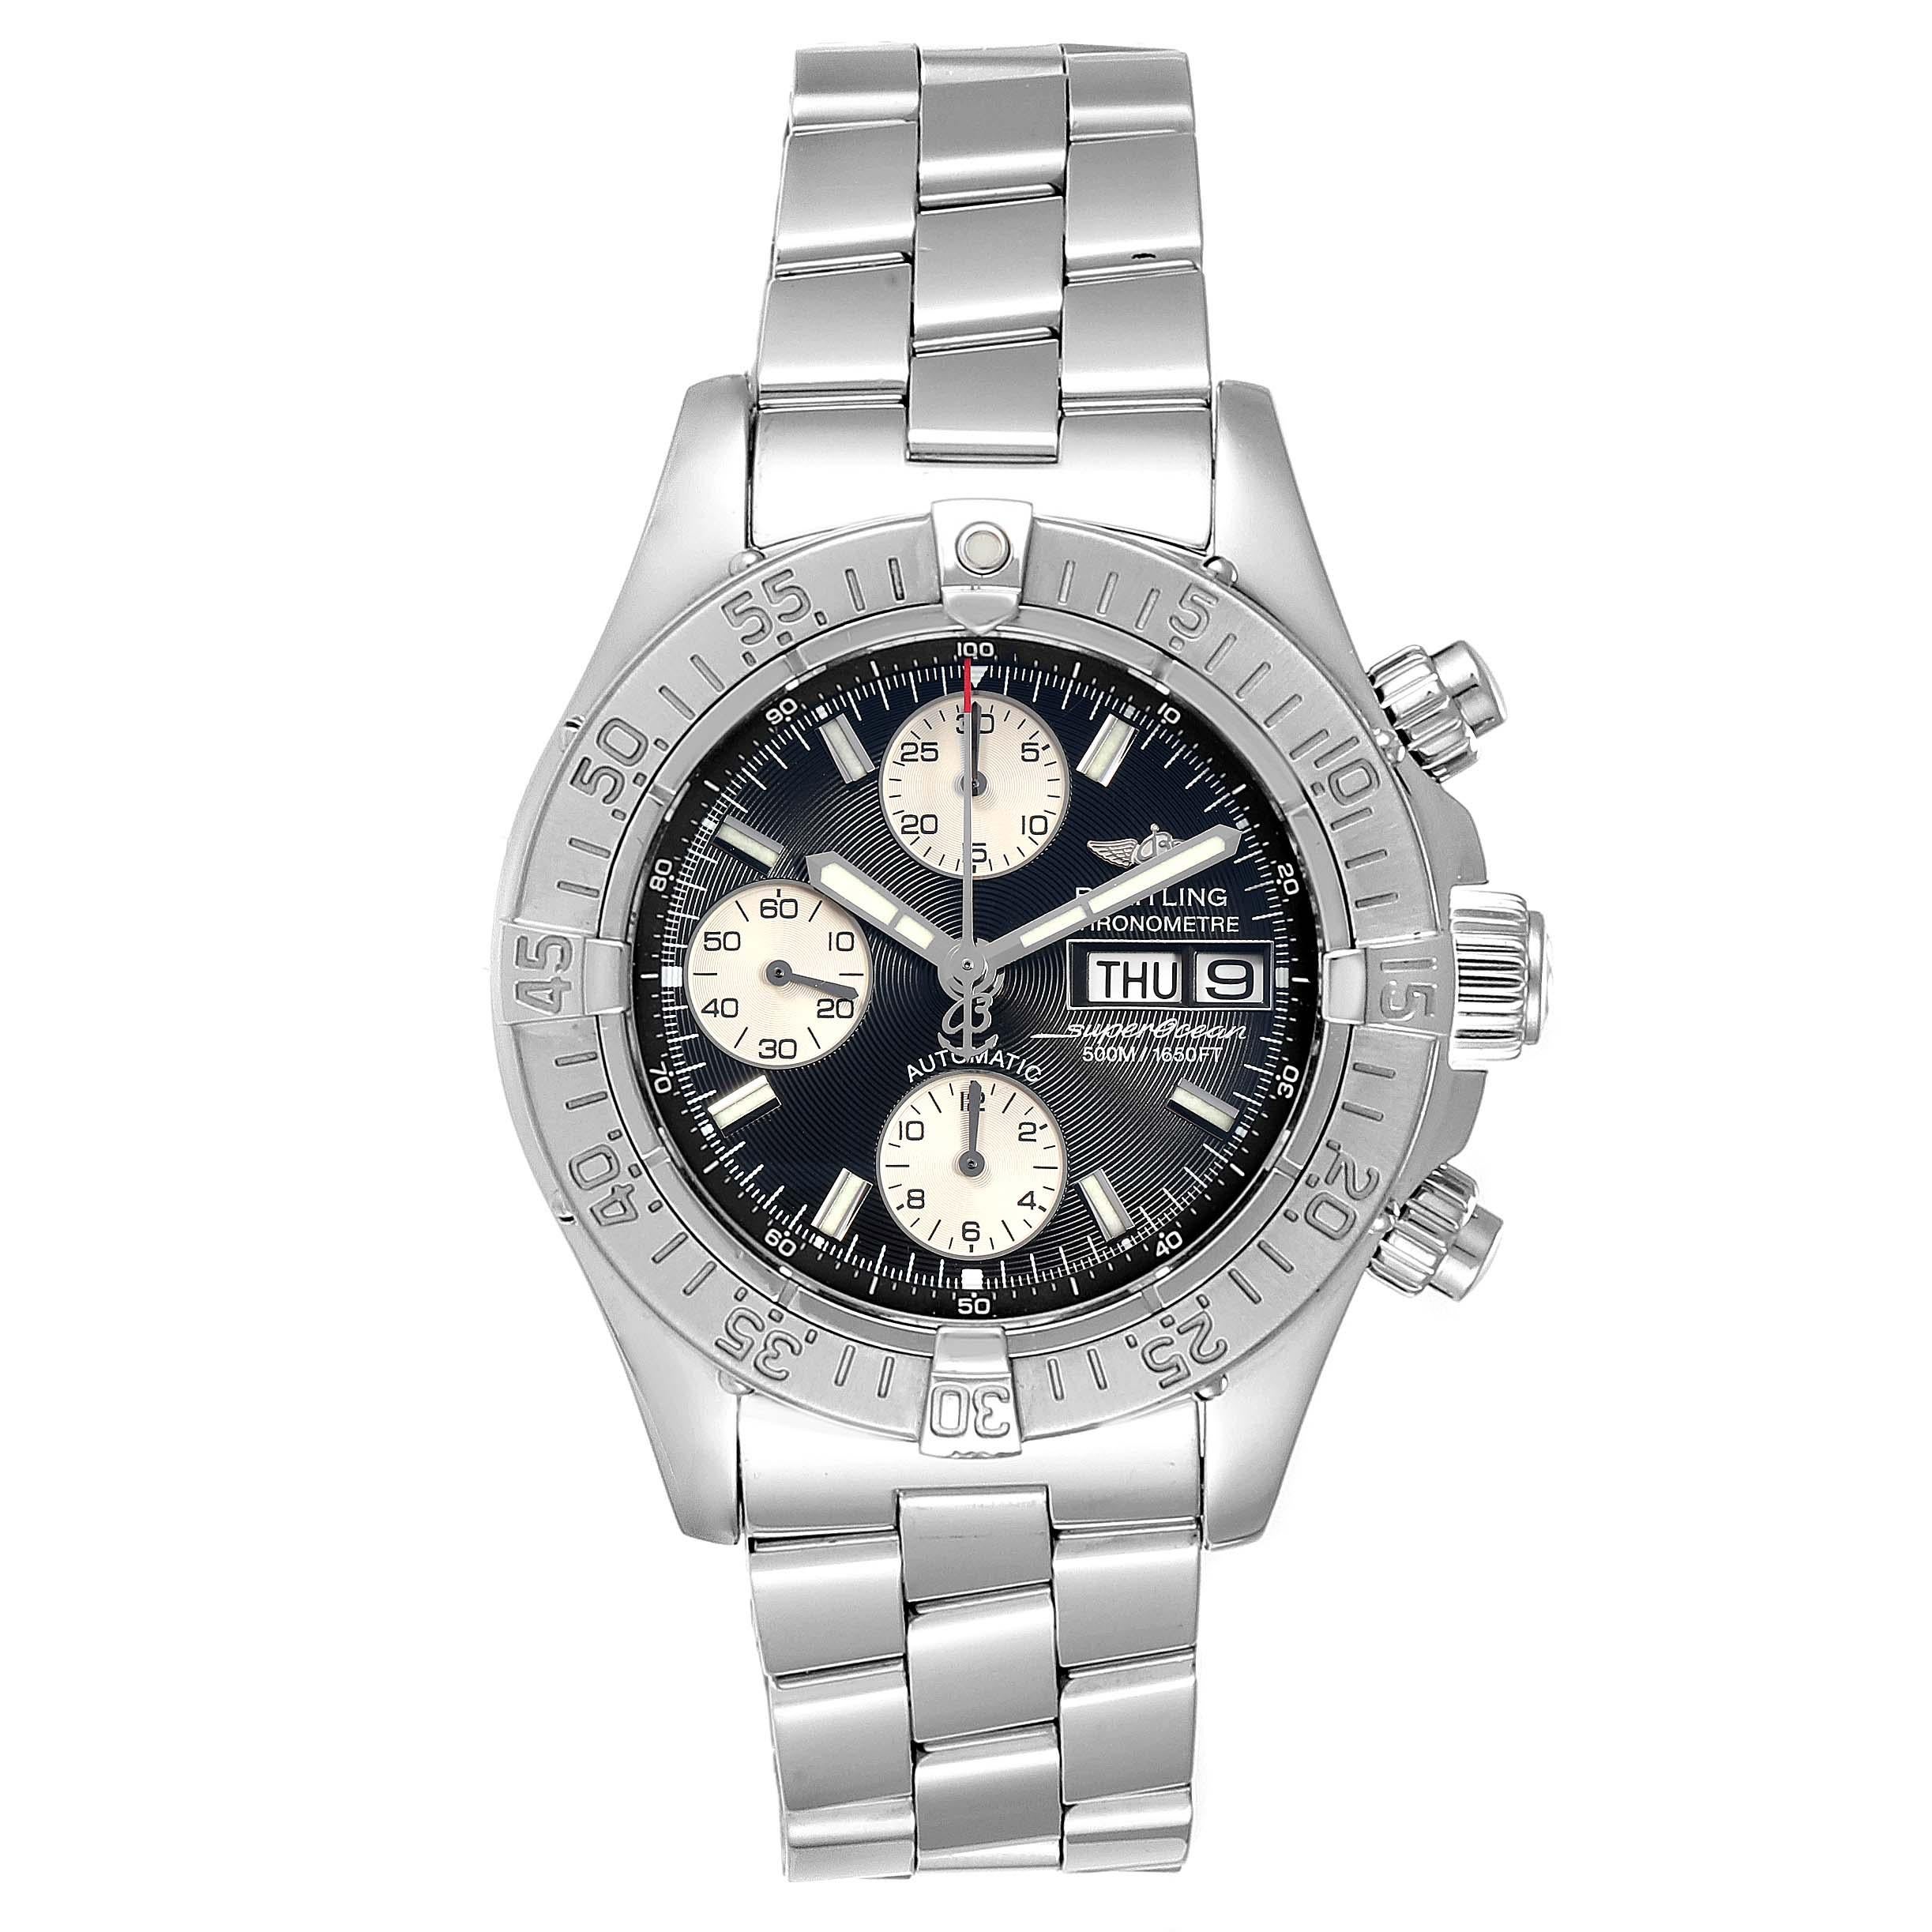 Breitling Aeromarine Superocean Chronograph Watch A13340 Box Papers. Authomatic self-winding movement. Stainless steel case 42.0 mm in diameter. Stainless steel screwed-down crown and pushers. Stainless steel unidirectional revolving bezel. 0-60